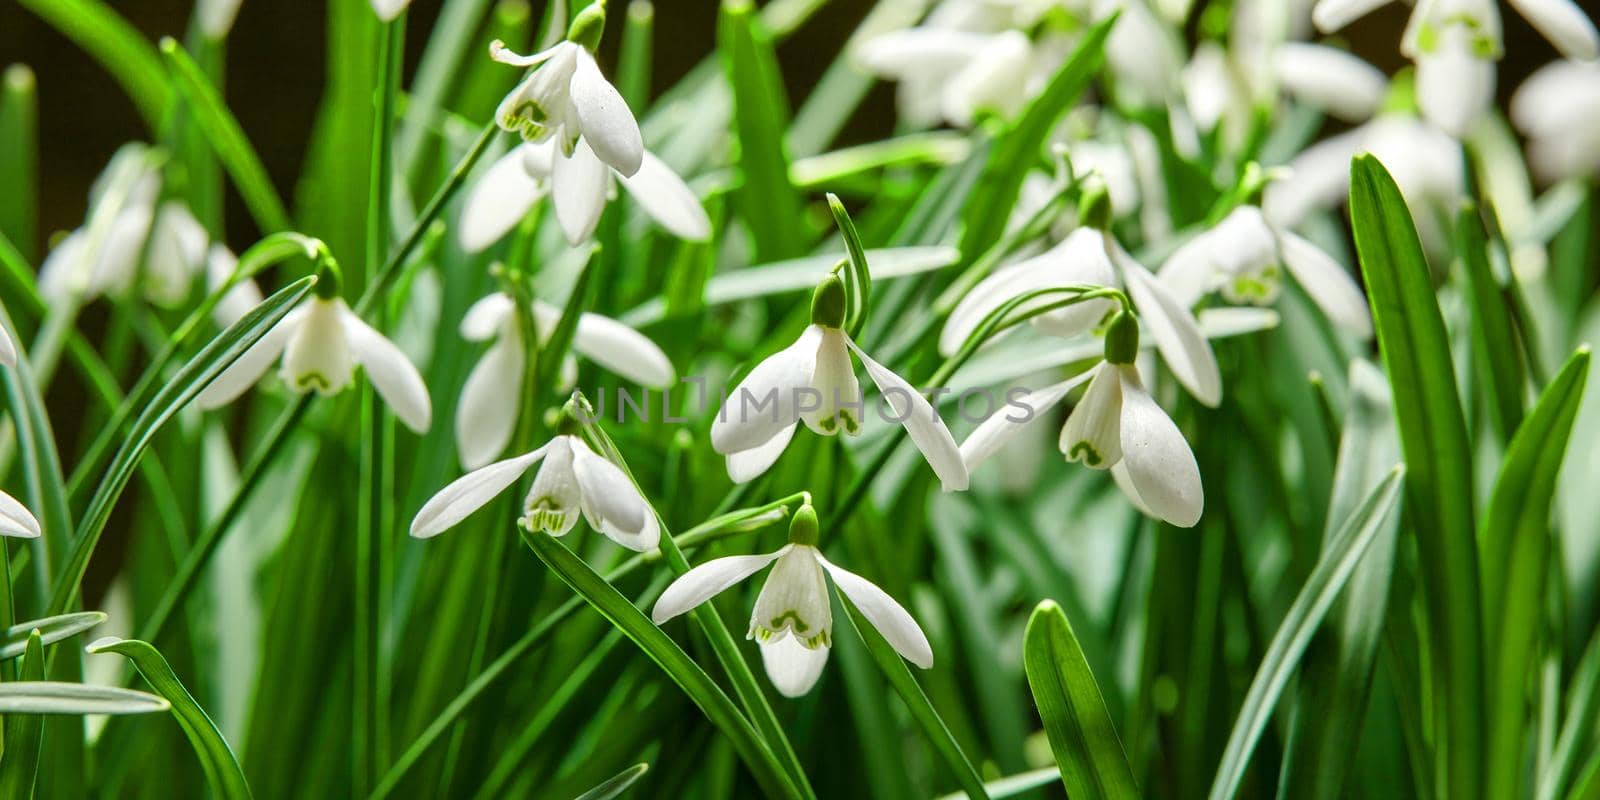 Closeup of white snowdrop flower or galanthus nivalis blossoming in nature during spring. Bulbous, perennial and herbaceous plant from the amaryllidaceae species thriving in a green garden outdoors.